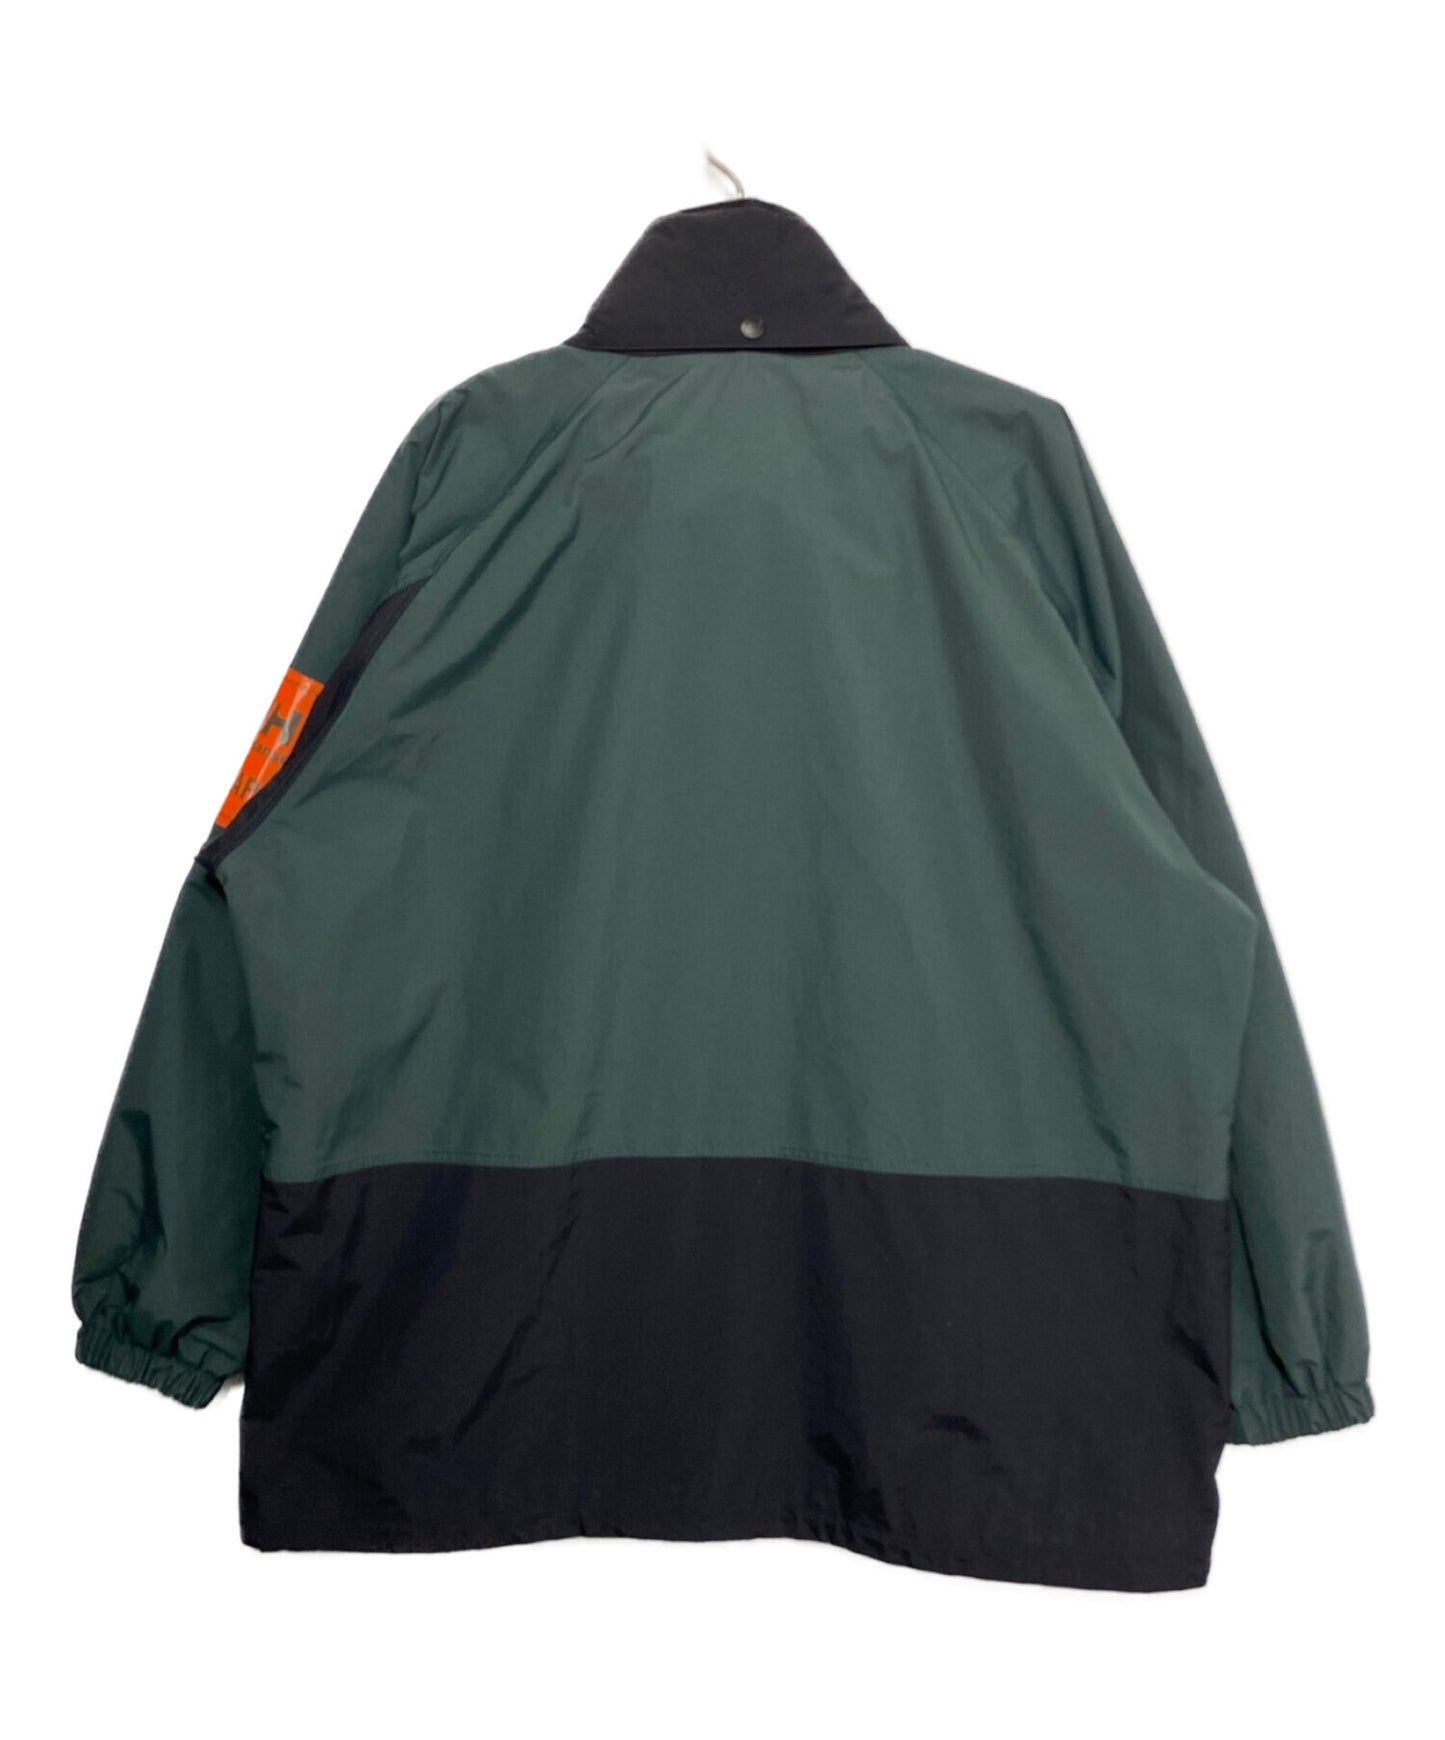 [Pre-owned] WTAPS BOW JACKET HV12000W